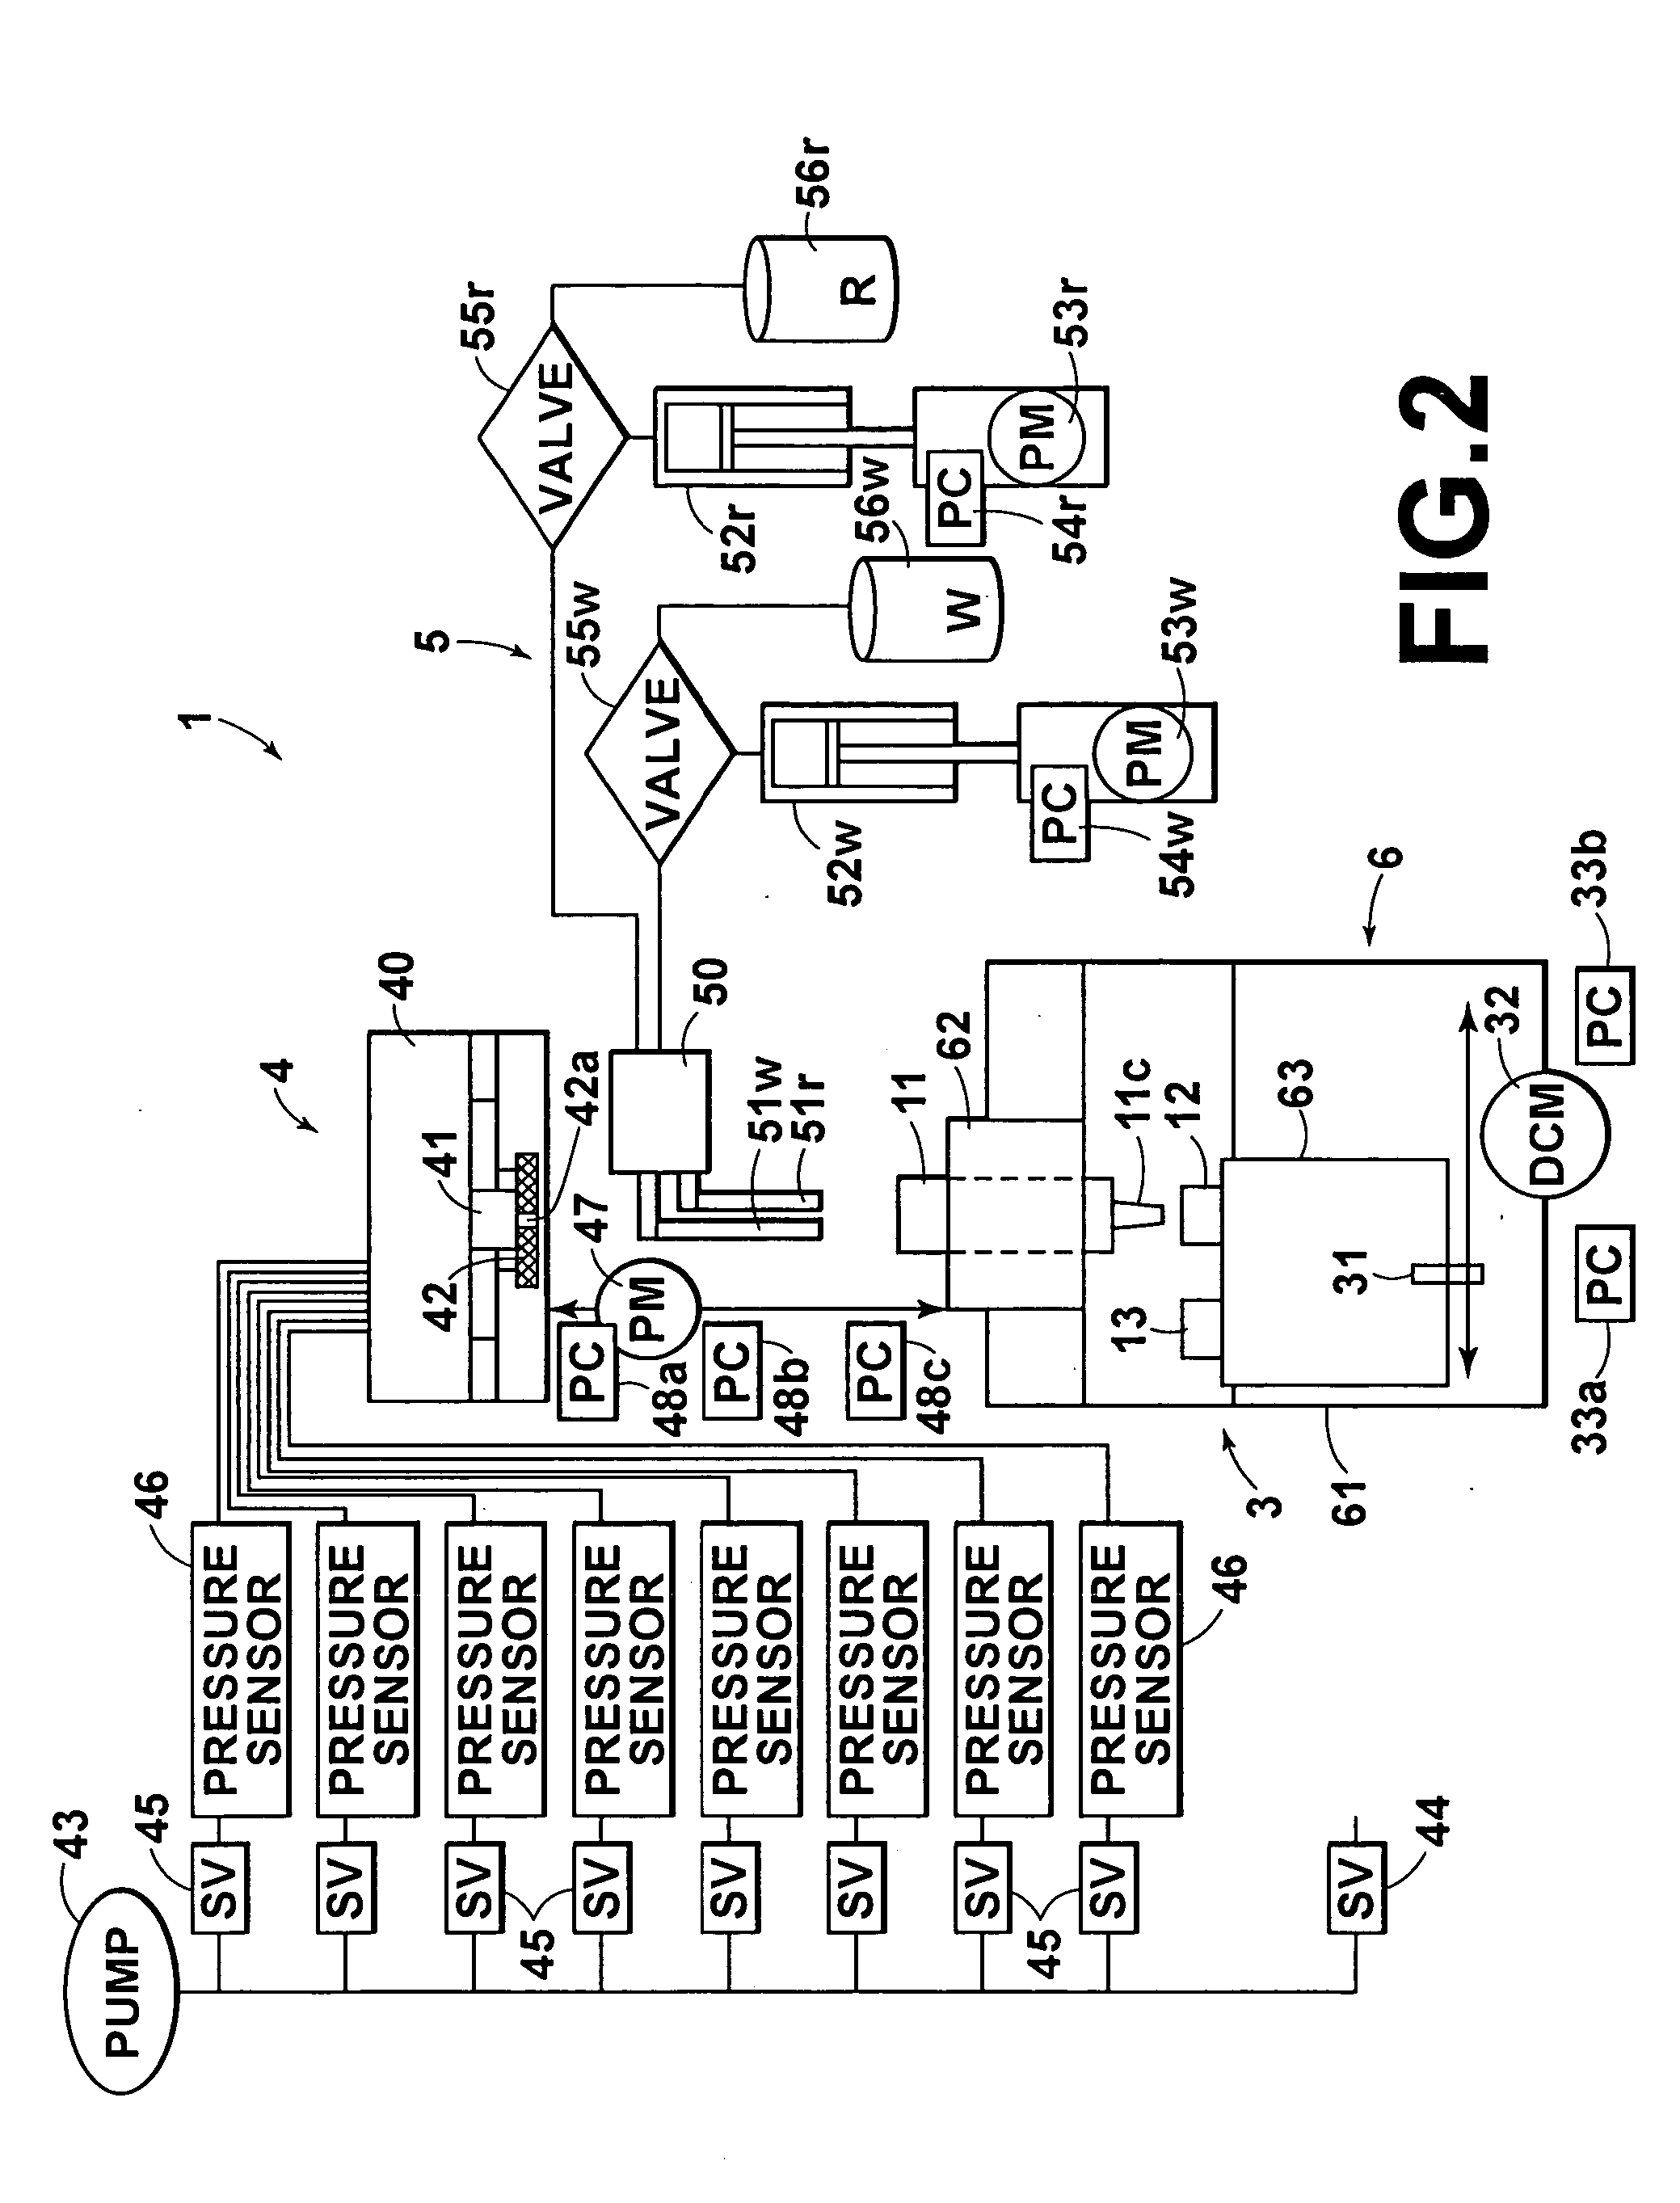 Rack for extracting apparatuses